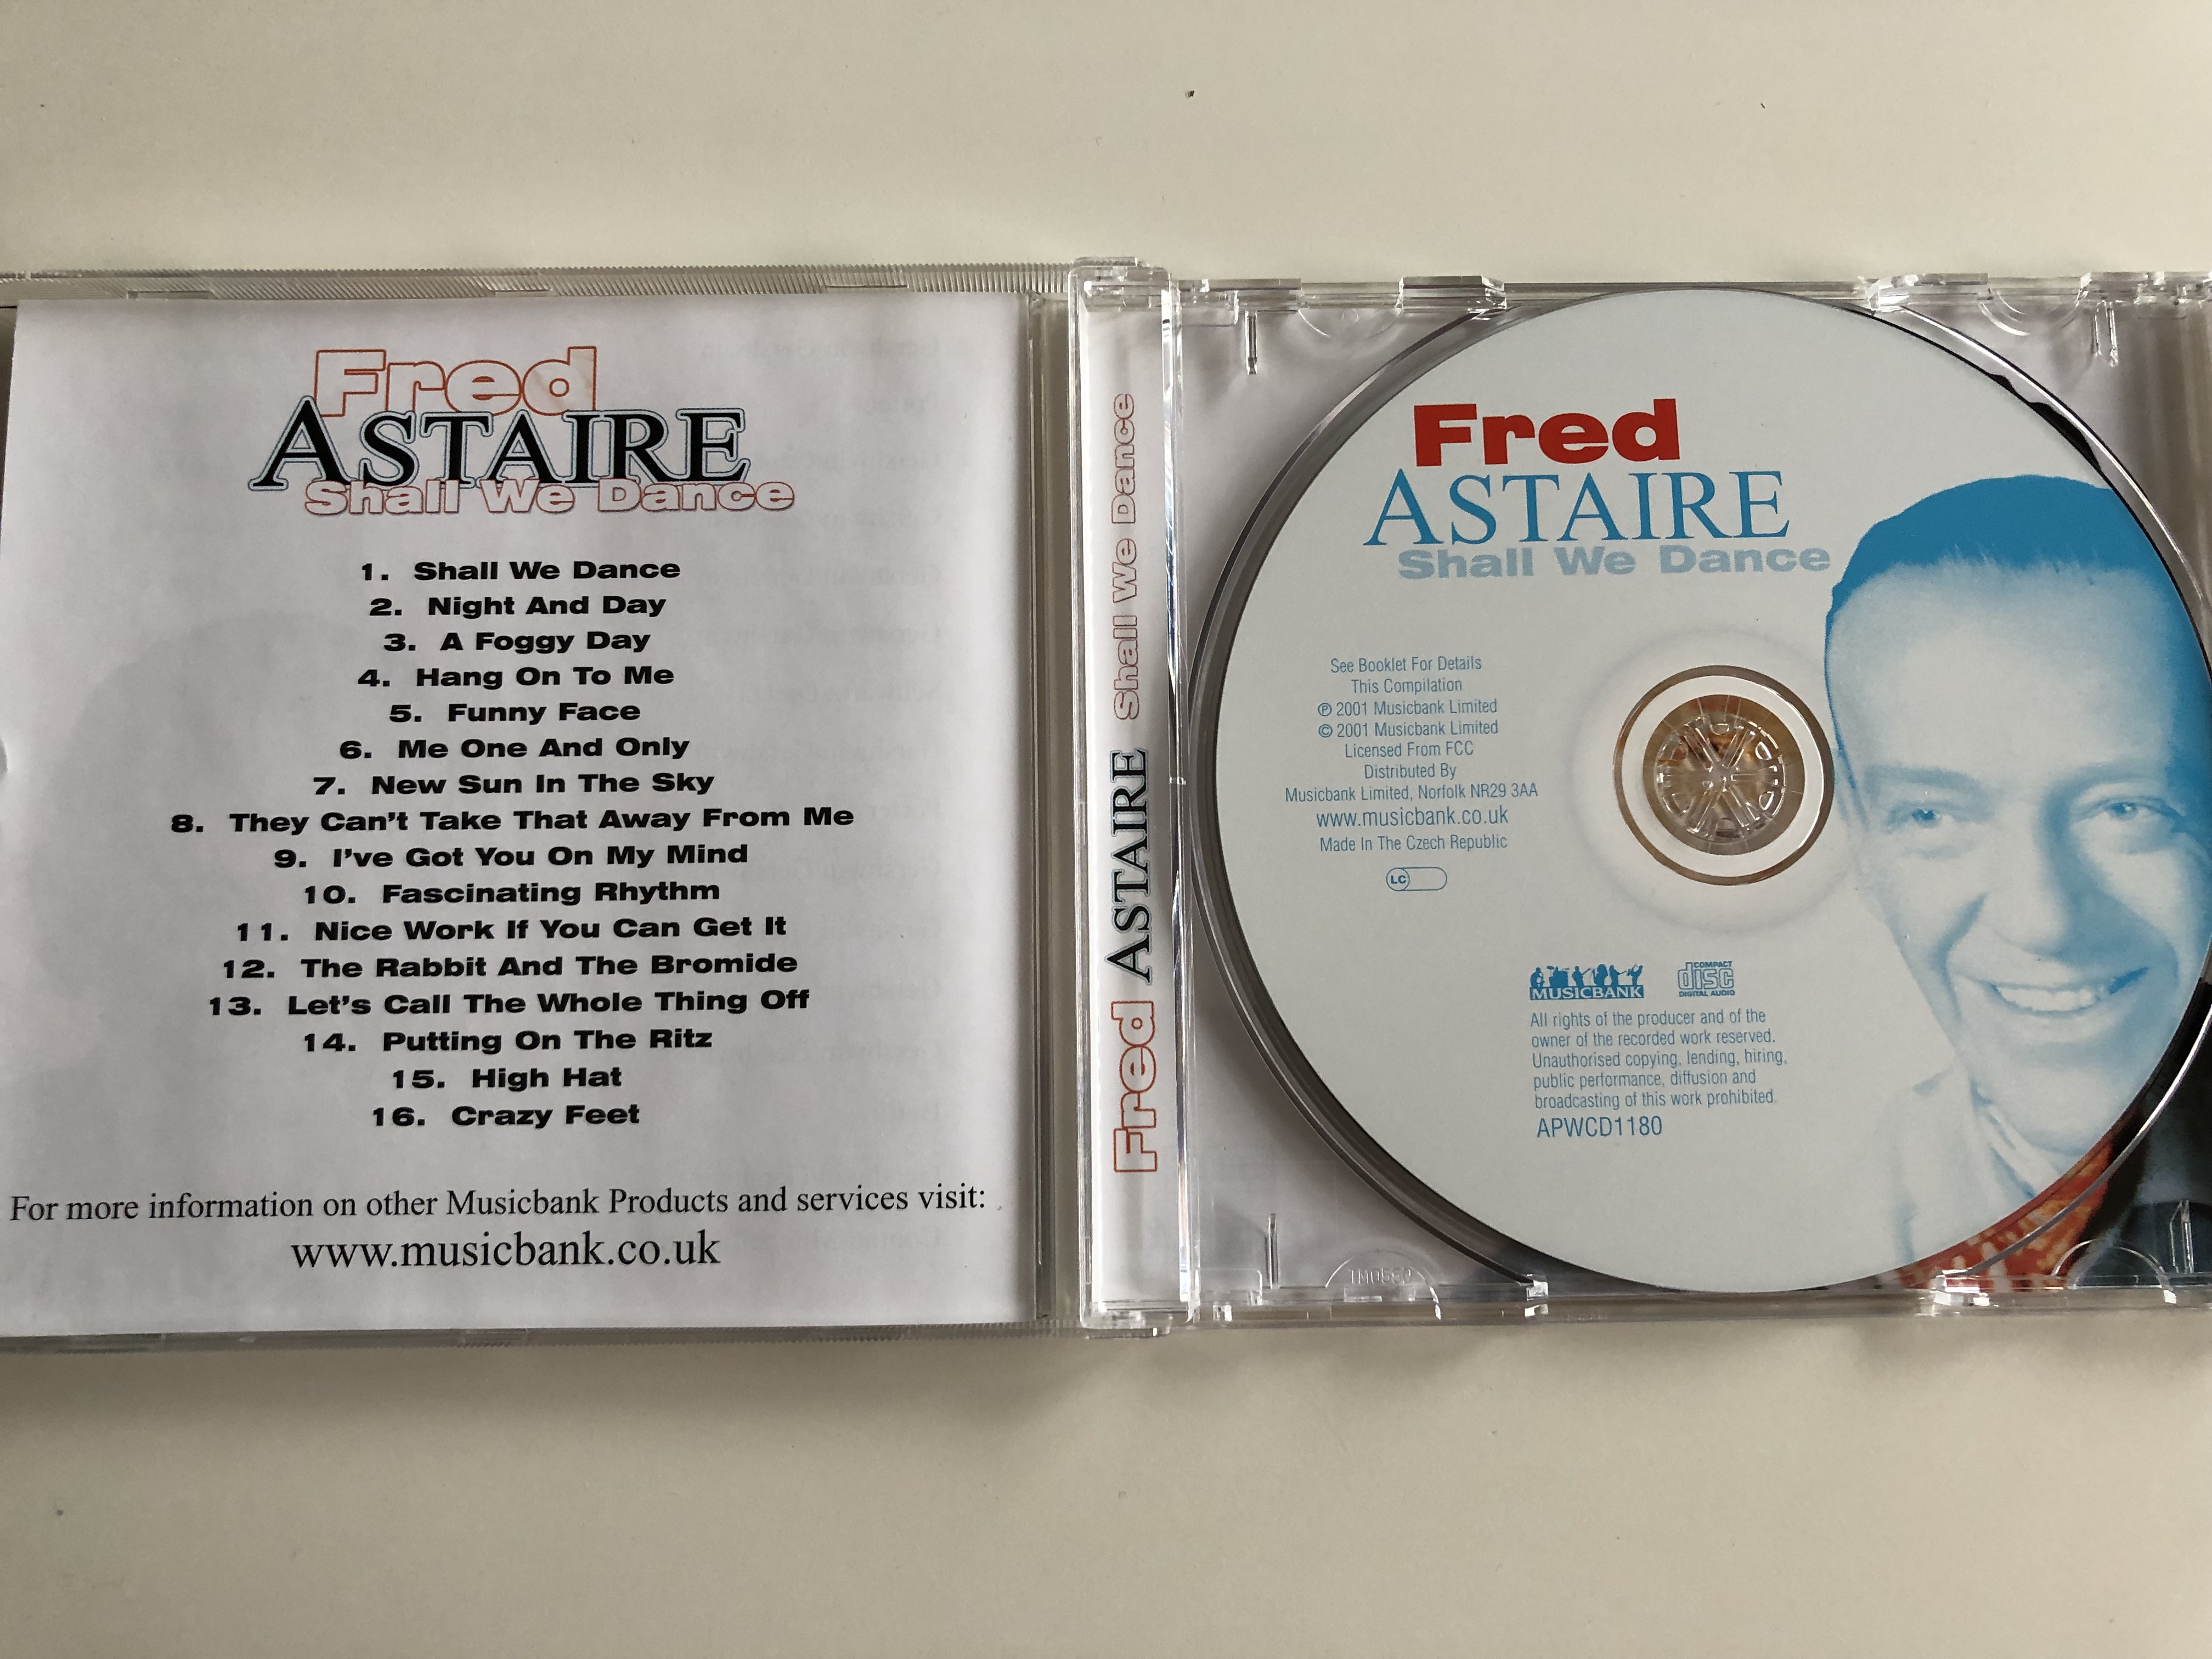 fred-astaire-shall-we-dance-night-and-day-a-foggy-day-hang-on-to-me-funny-face-new-sun-in-the-sky-audio-cd-2001-apwcd1180-3-.jpg